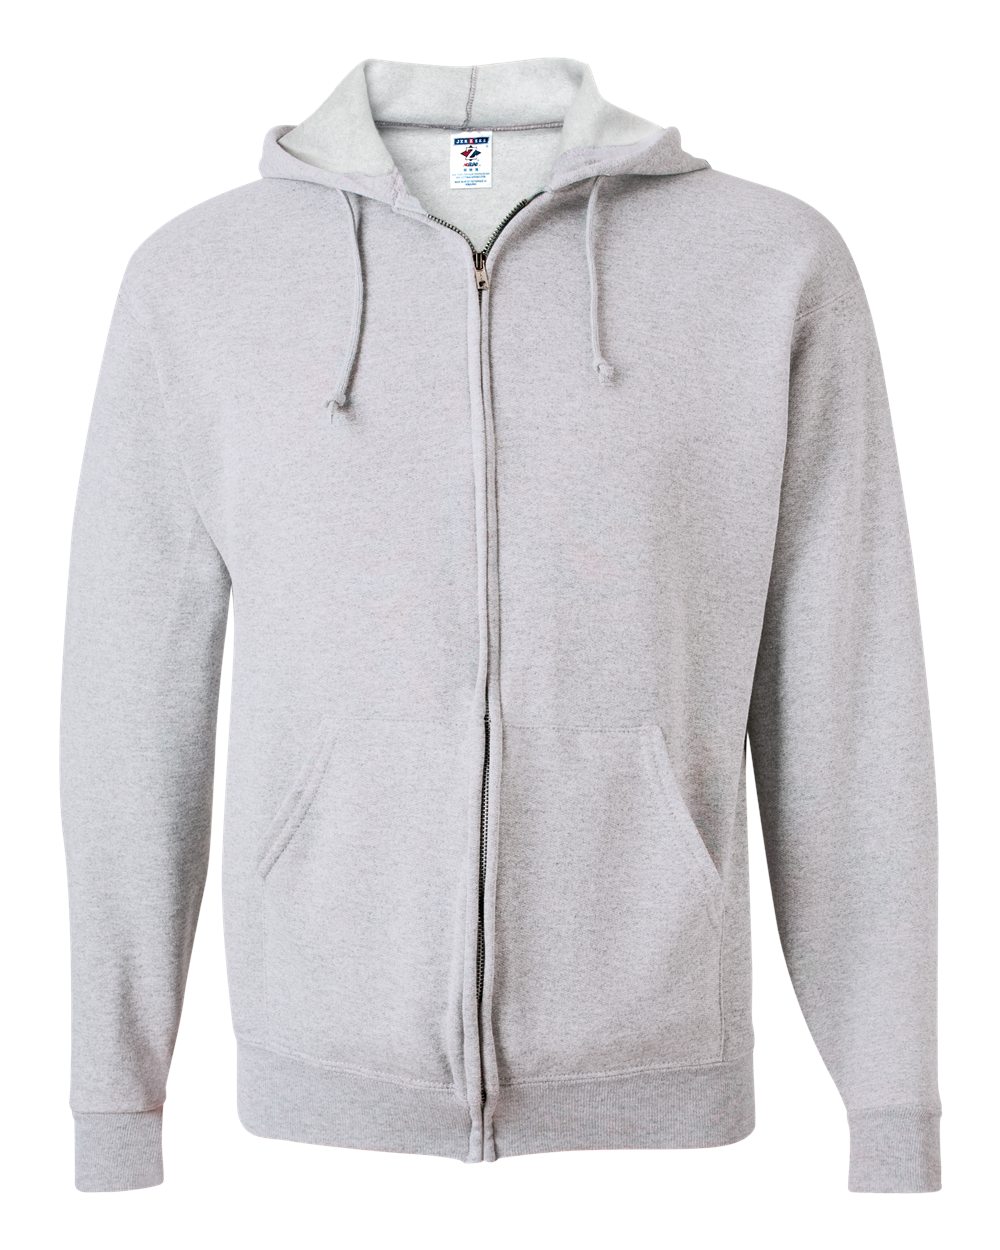 JERZEES&#xAE; - NuBlend Full-Zip Hooded Sweatshirt - 993MR | 8 Oz./yd&#xB2; (Us), 50/50 Cotton/polyester | Embrace Style and Warmth in One with This Iconic Zip-Up, Making a Powerful Statement Wherever You Go